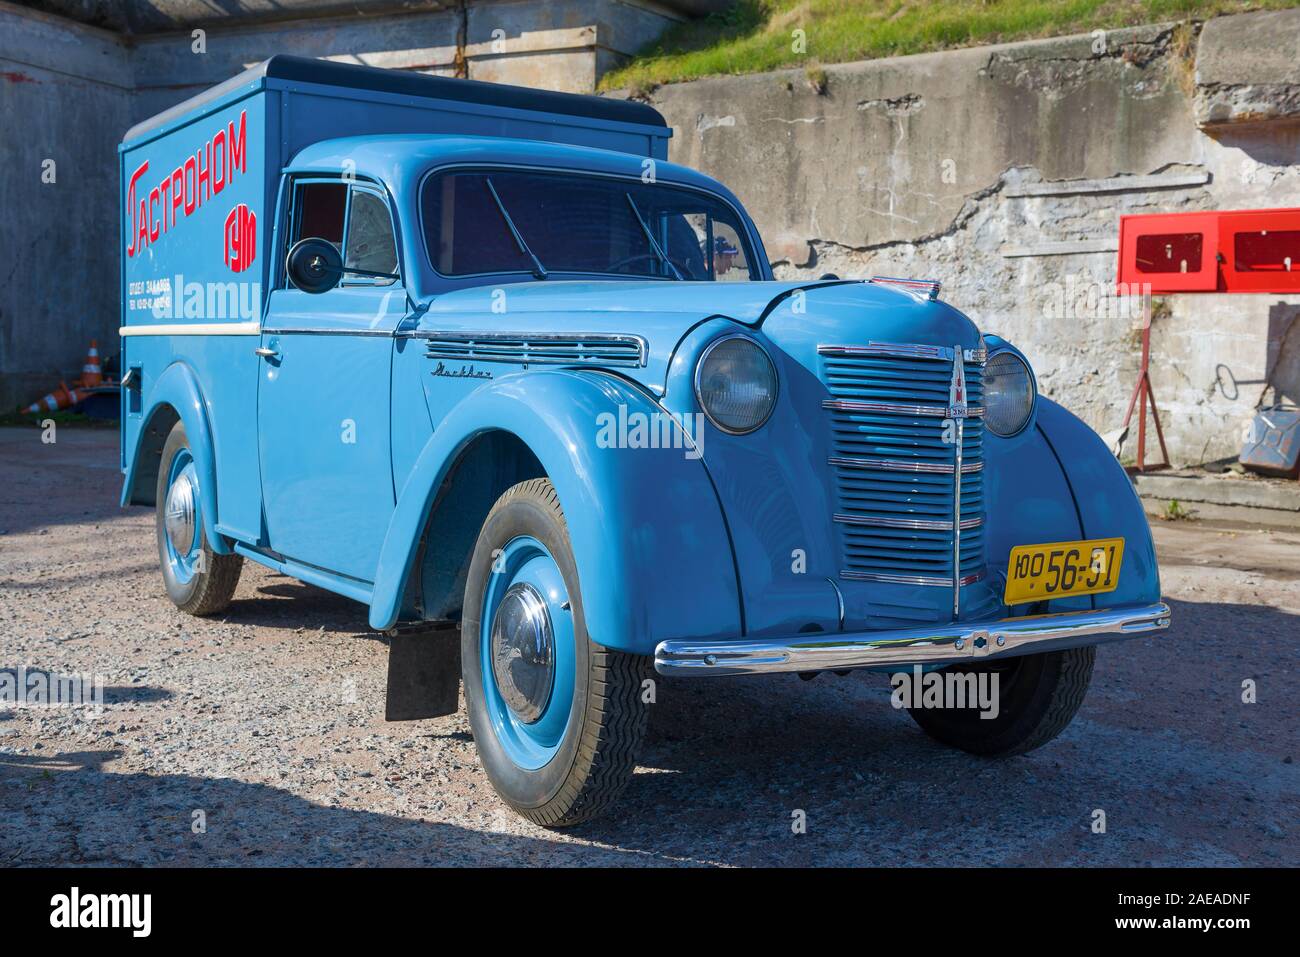 KRONSTADT, RUSSIA - SEPTEMBER 14, 2019: Soviet retro car Moskvich-401 with body pickup close-up. Retro transport exhibition 'Fortuna-2019' Stock Photo